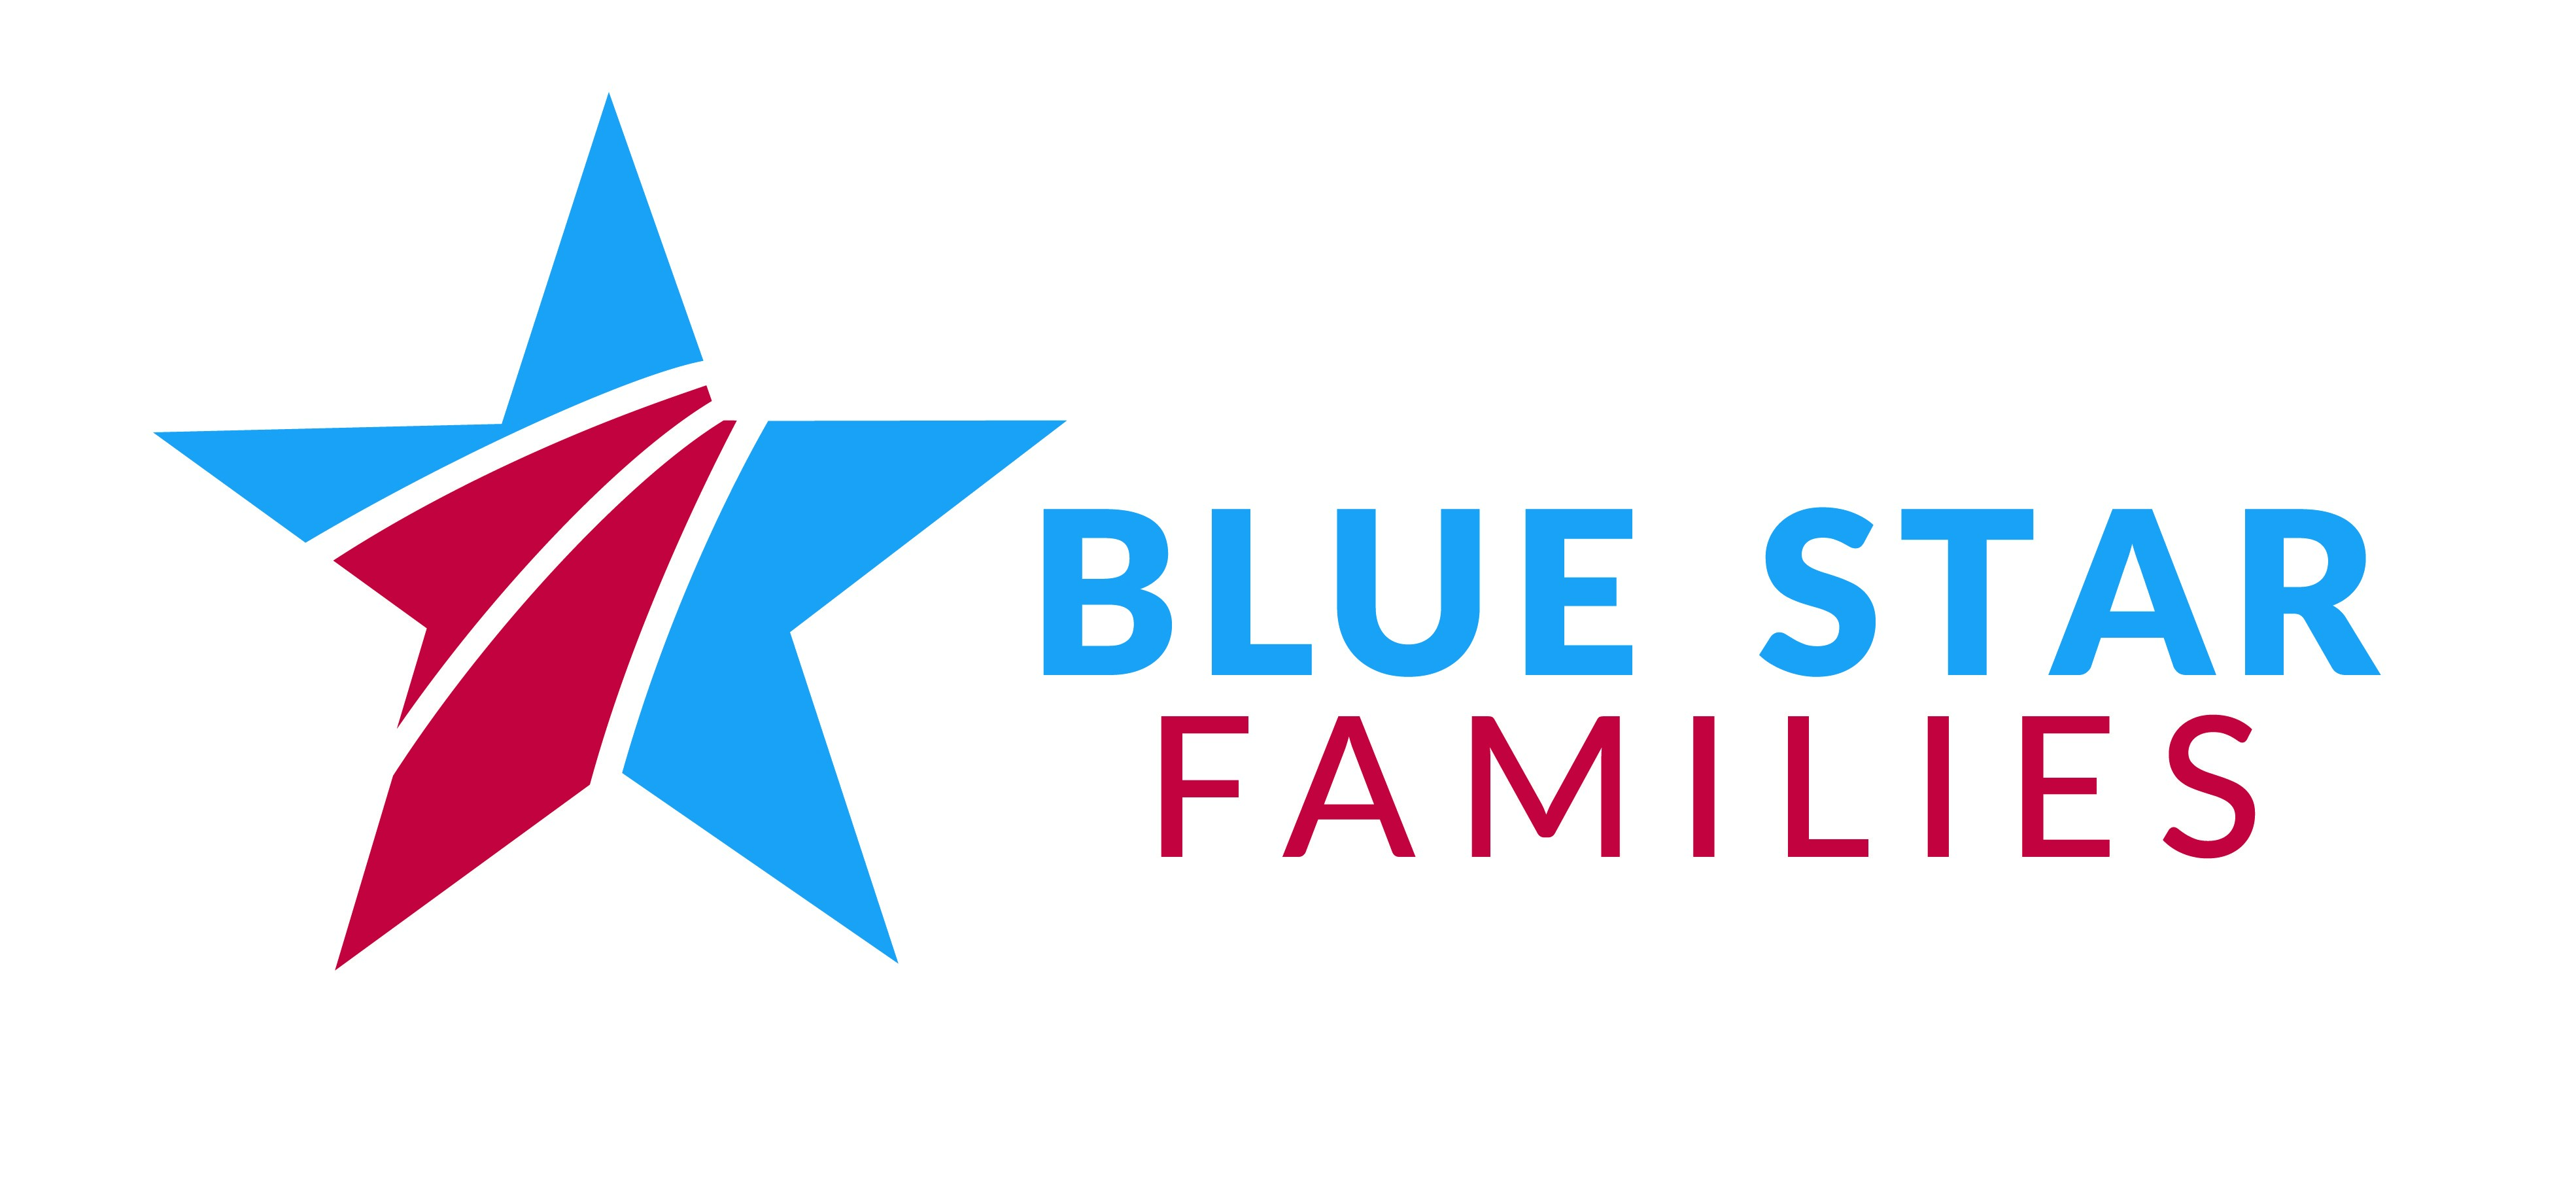 a logo in red white and blue of blue star families